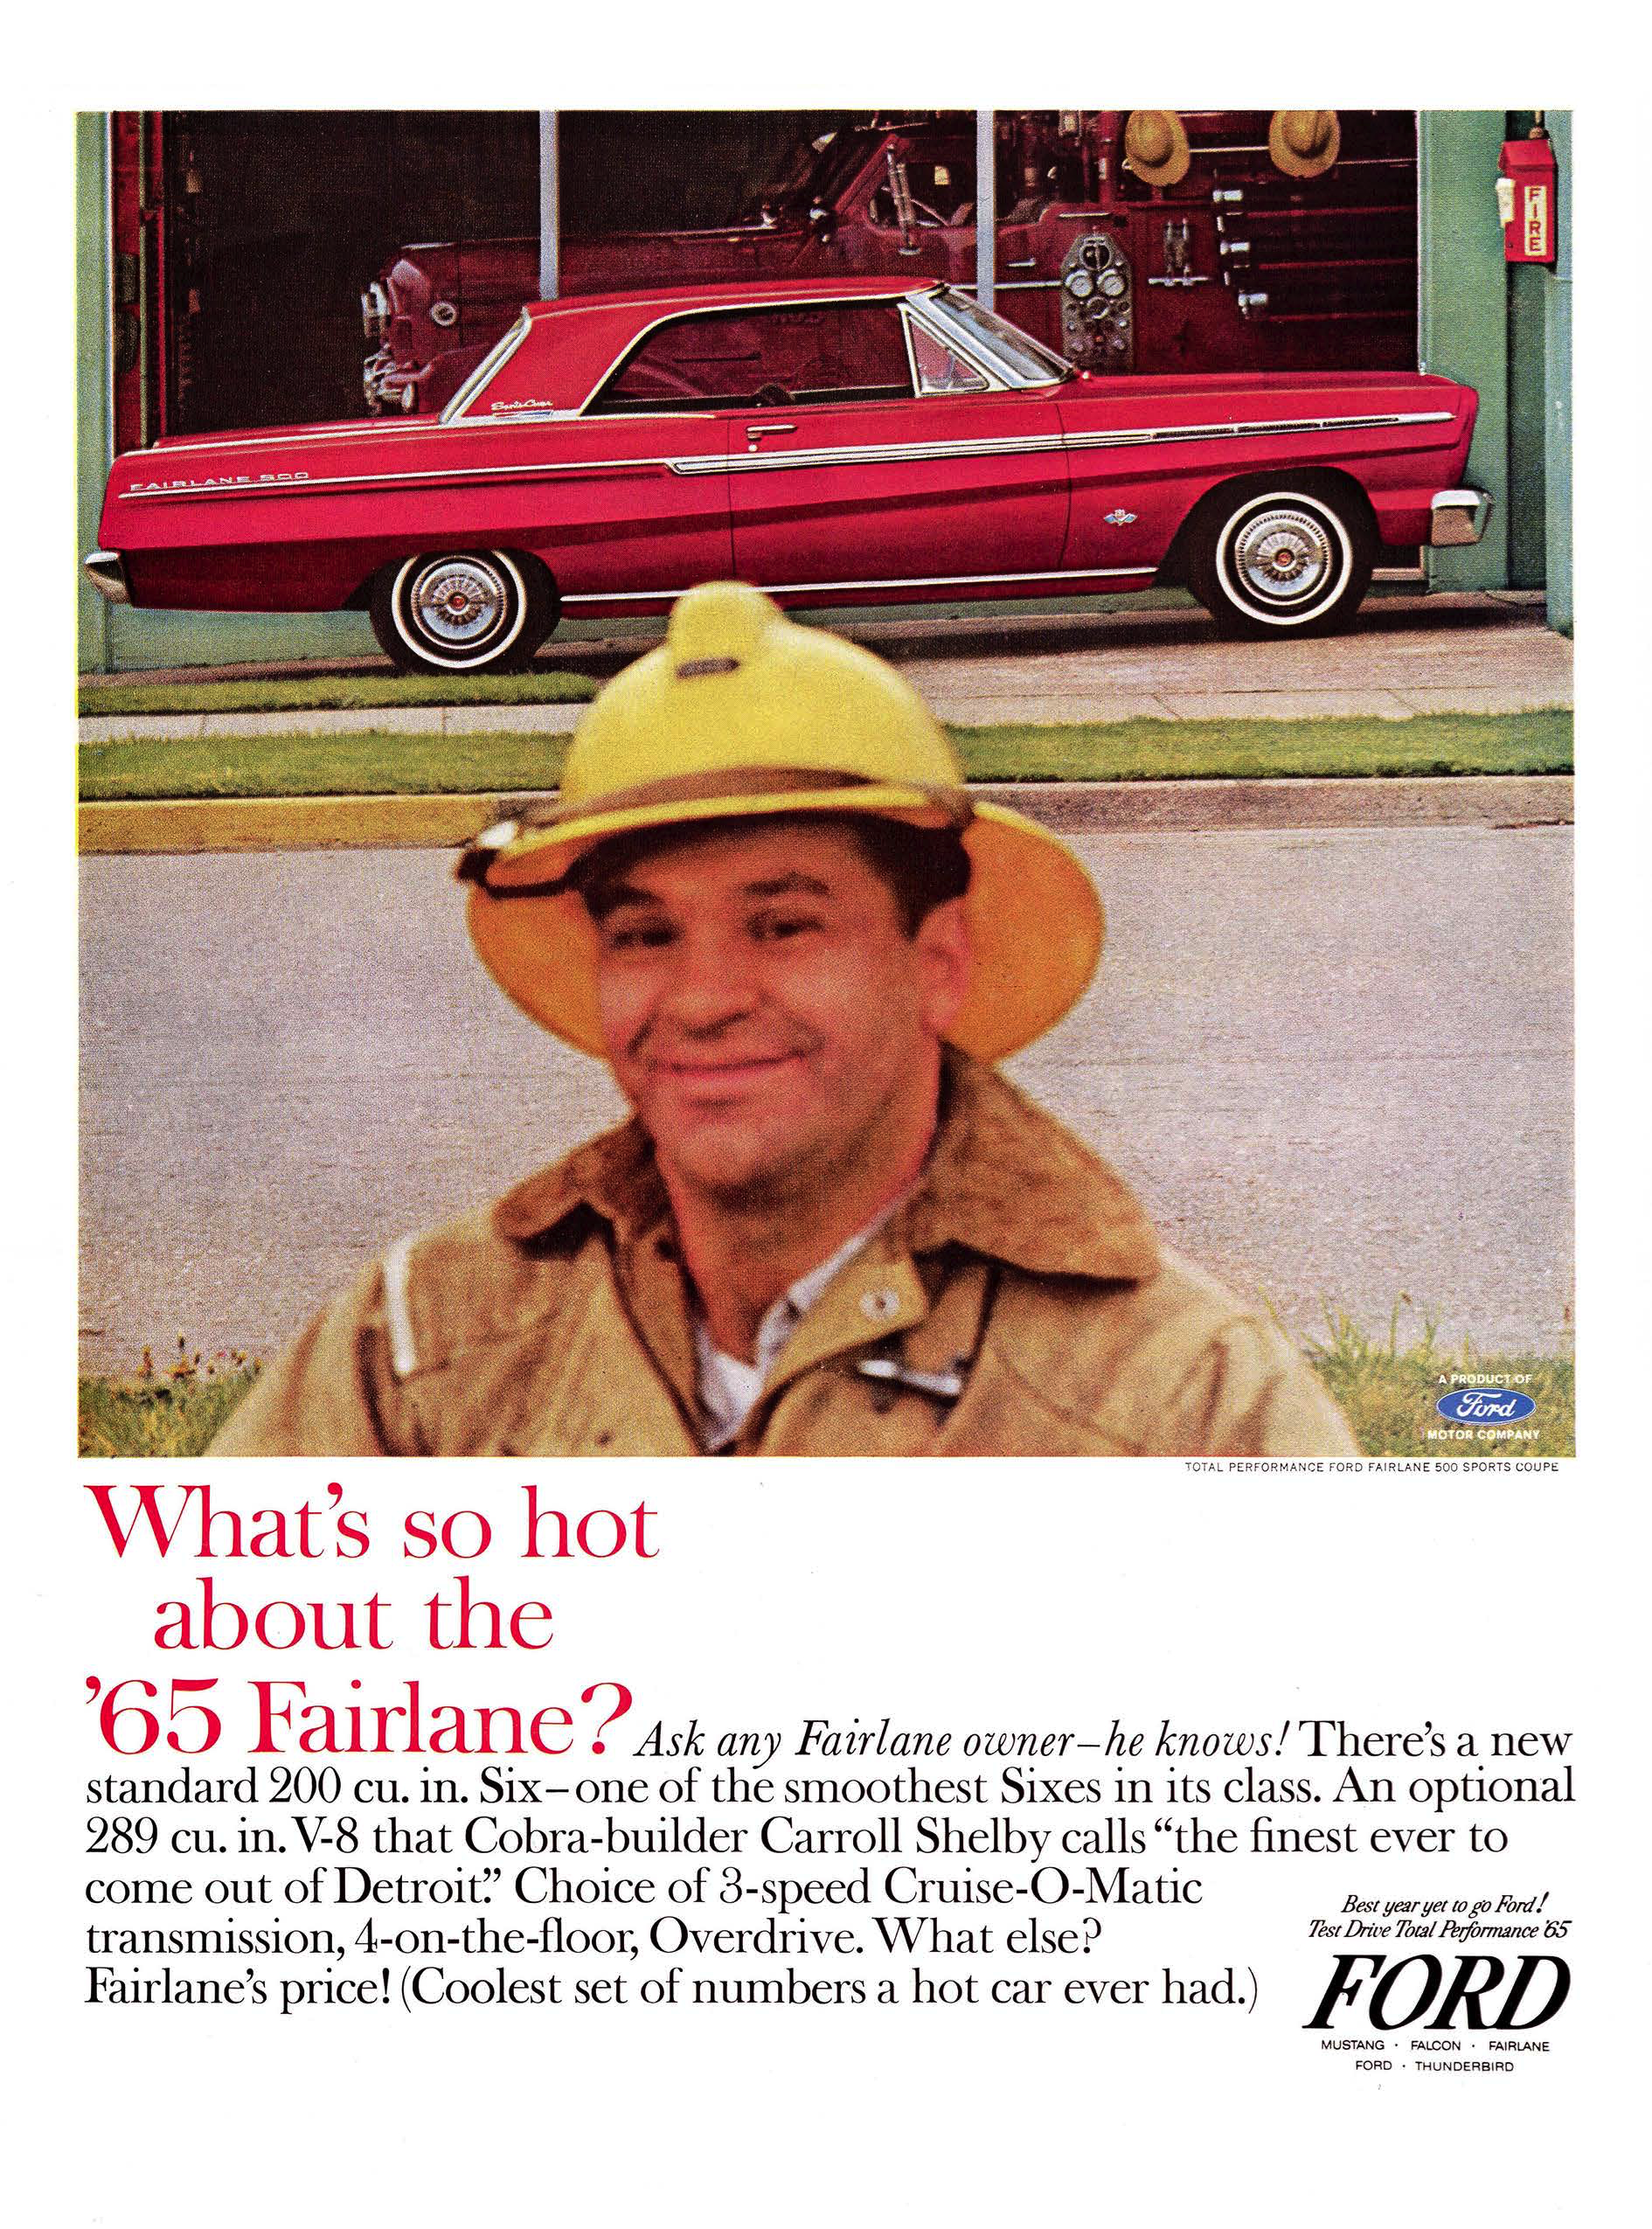 1965 Ford Ad Fairlane 500 Sports Coupe "What's so hot about the '65 Fairlane?"